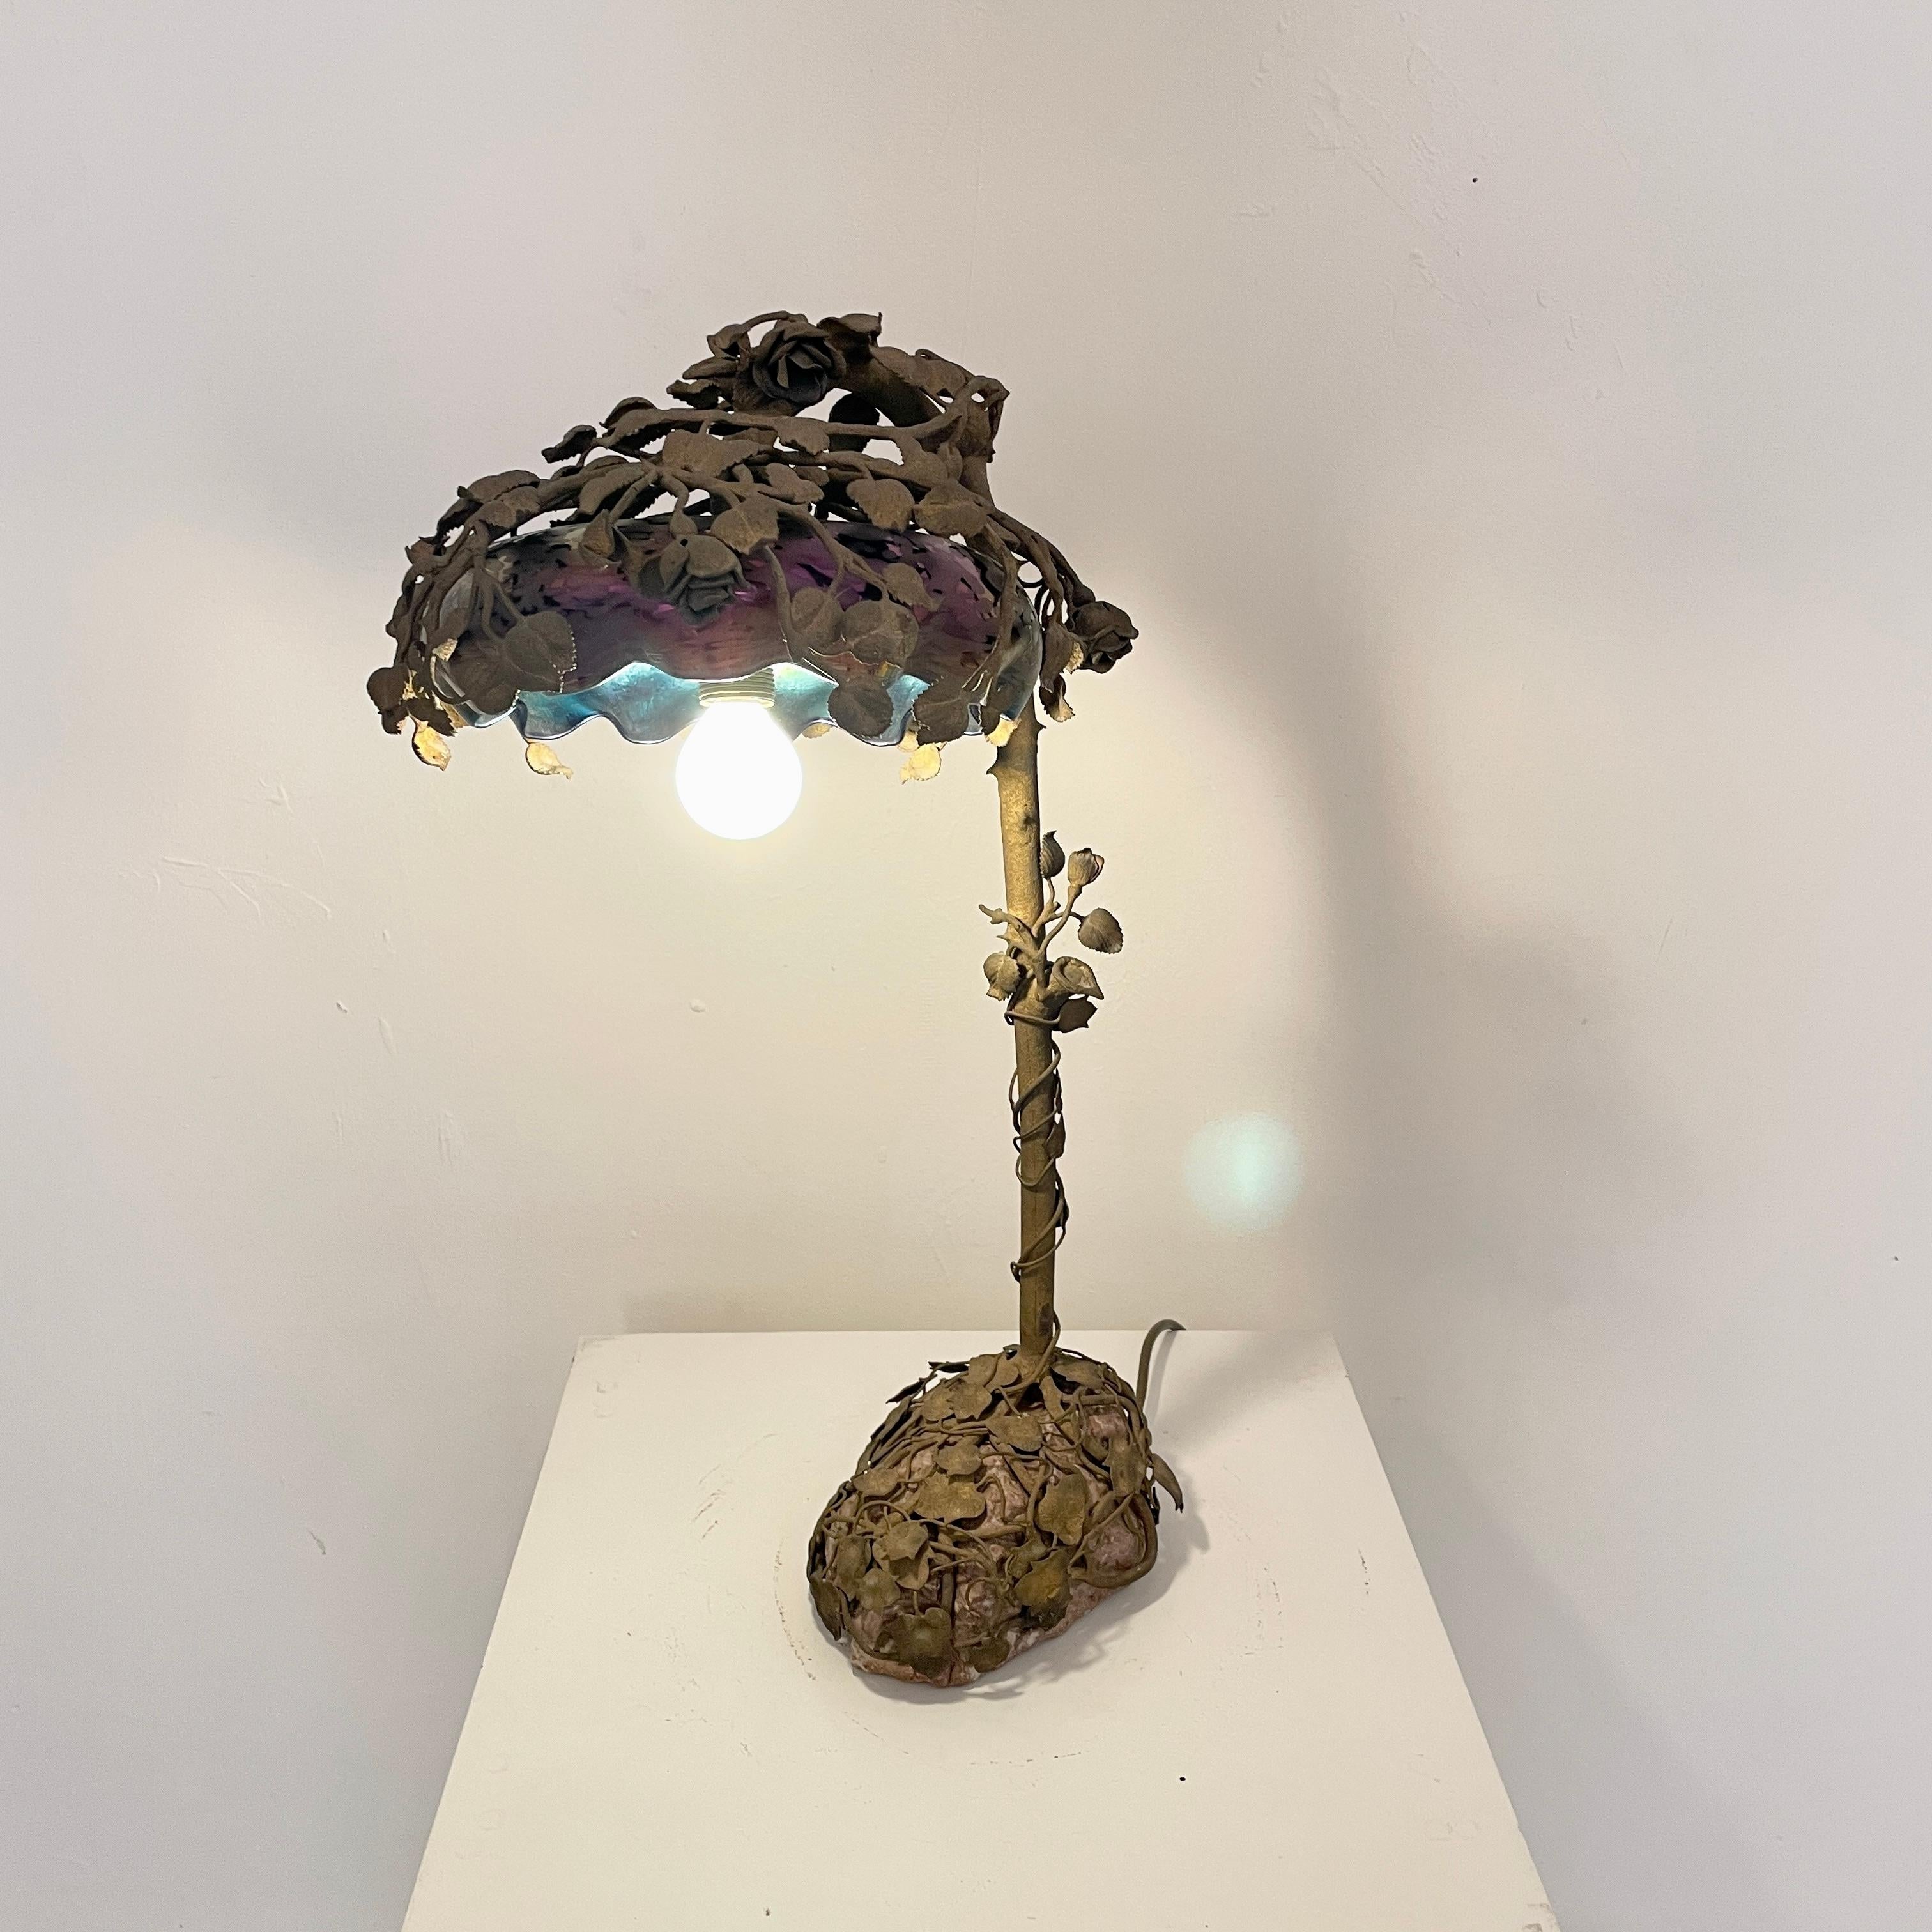 This fancy and very rare French Floral Art Nouveau table lamp was made in Paris around 1910. 
It is cast in bronze and features a rosebush sitting on a real stone base. The lampshade is made out of enameled glass. 
A beautiful and unique model.
A